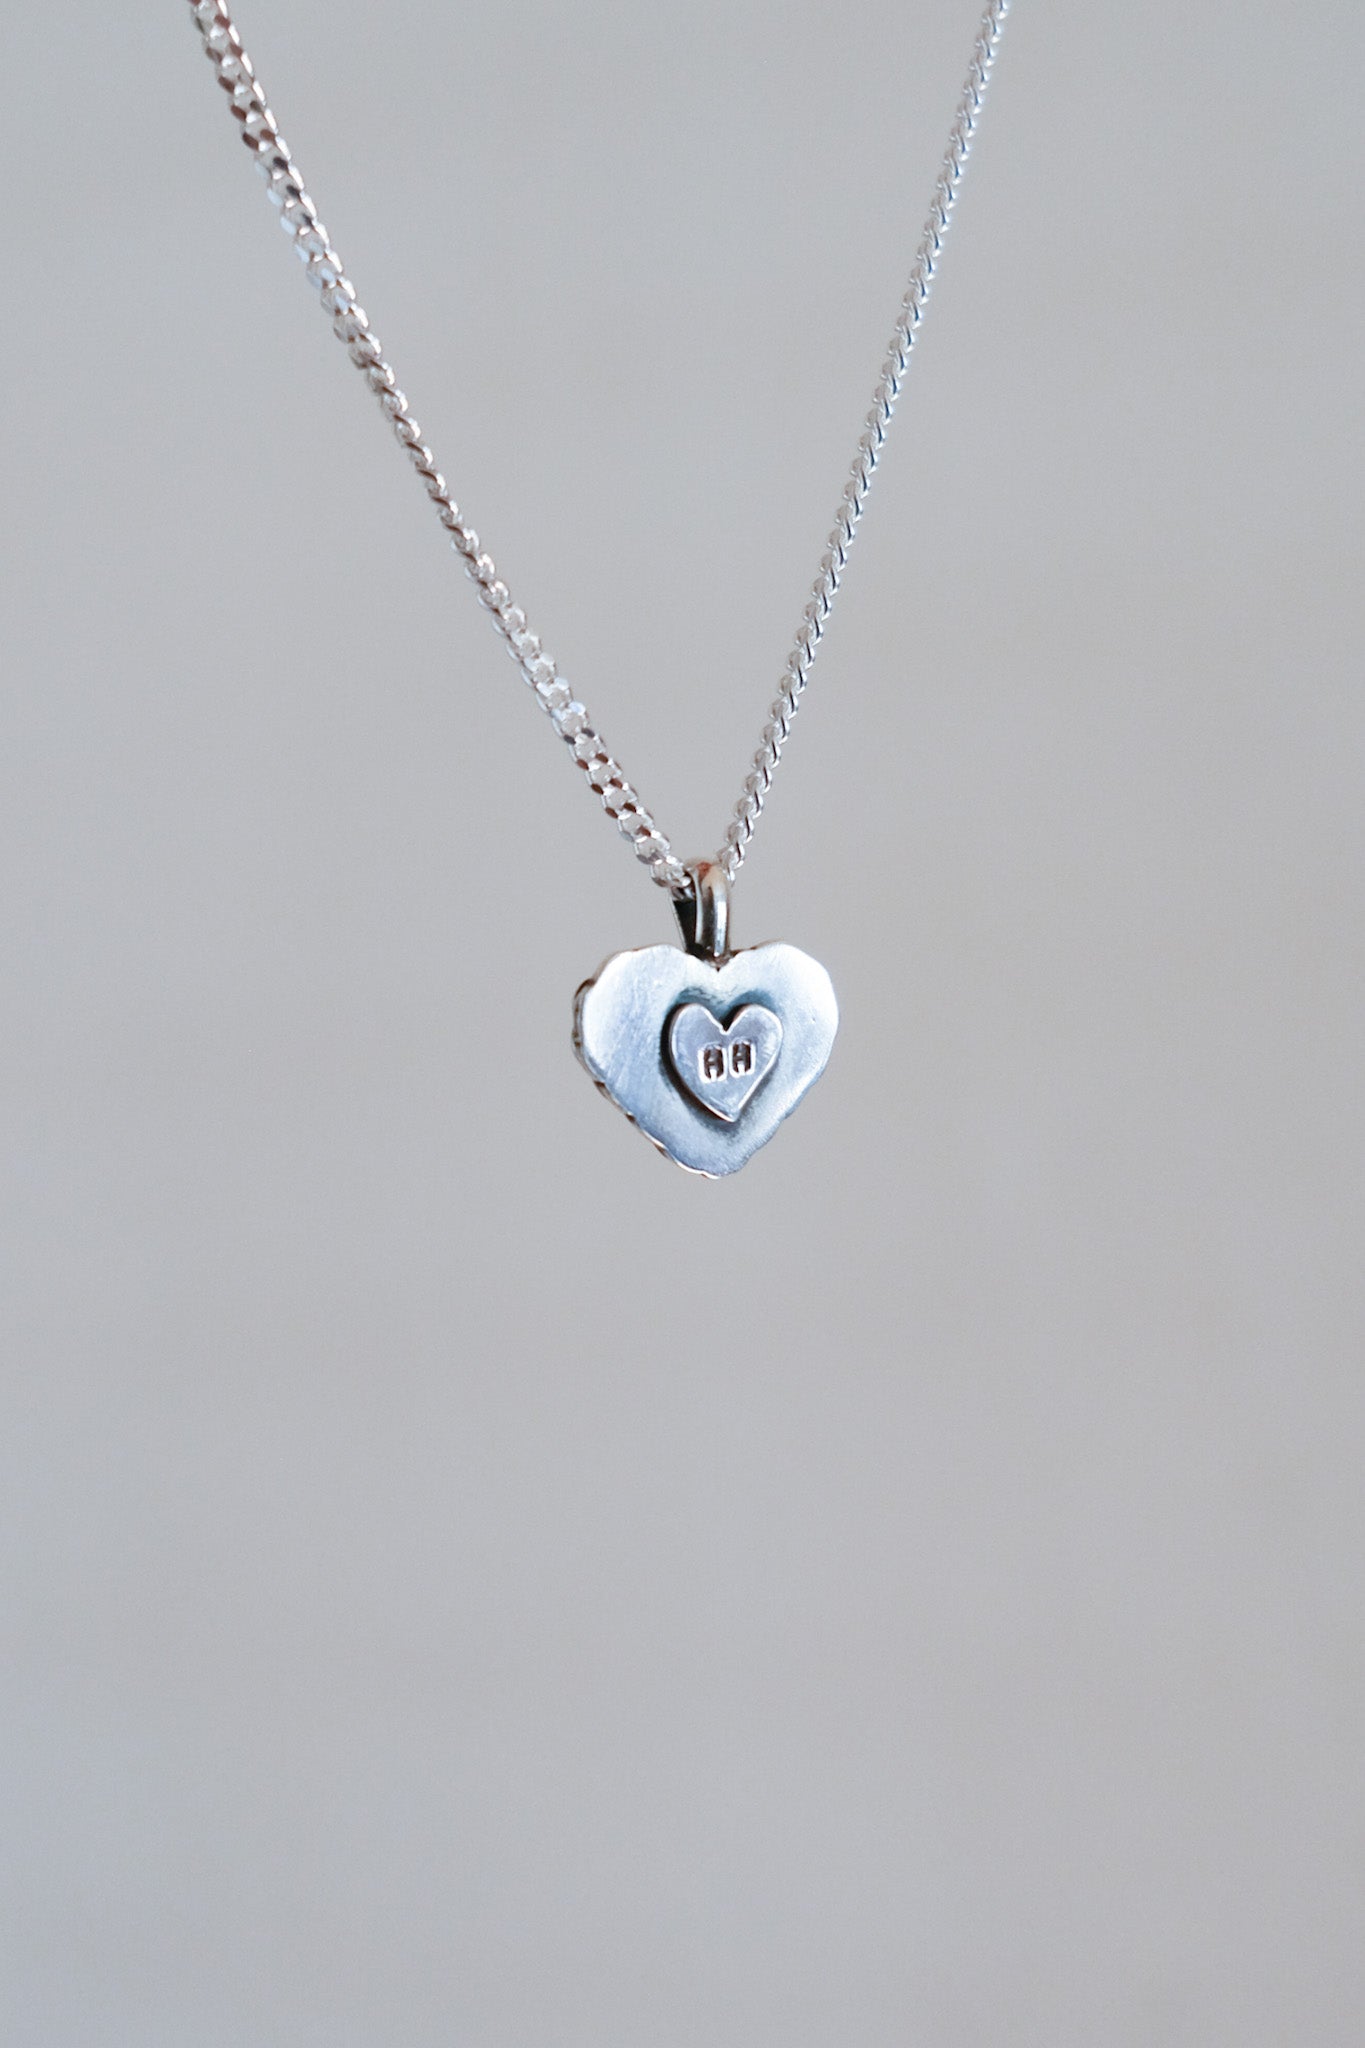 Stand by Your Heart Charm Necklace - Moonstone